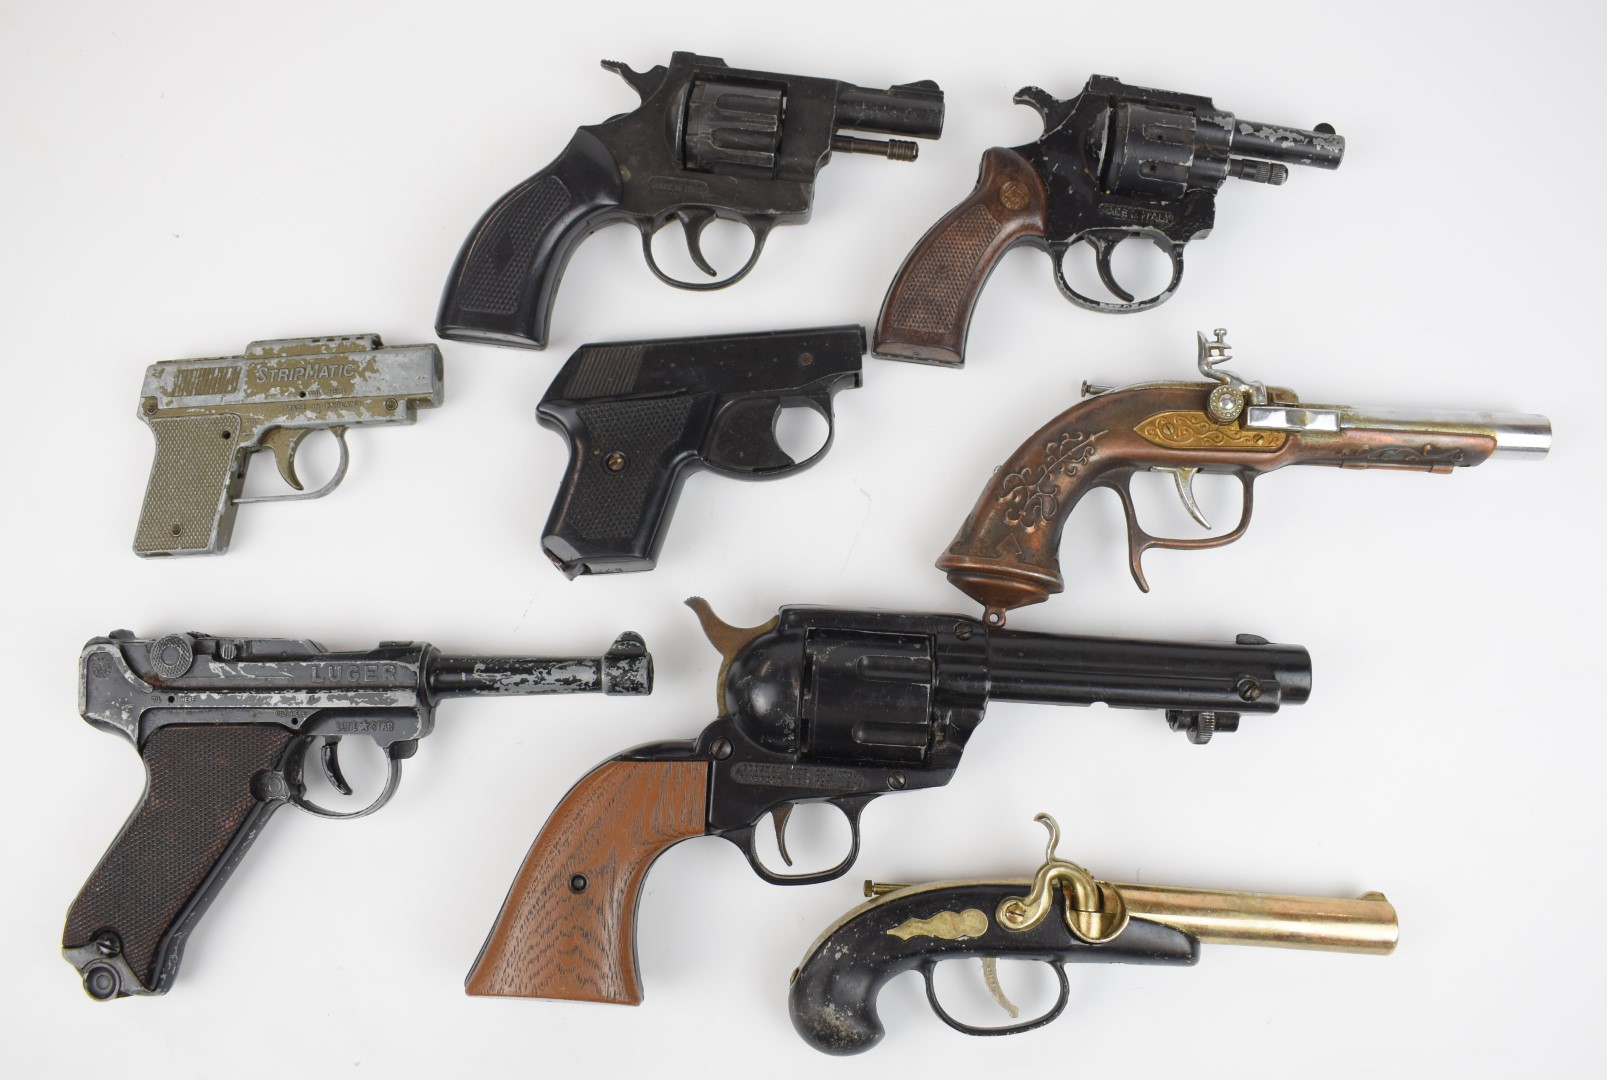 Eight replica or blank firing pistols and revolvers including Luger, StripMatic etc.